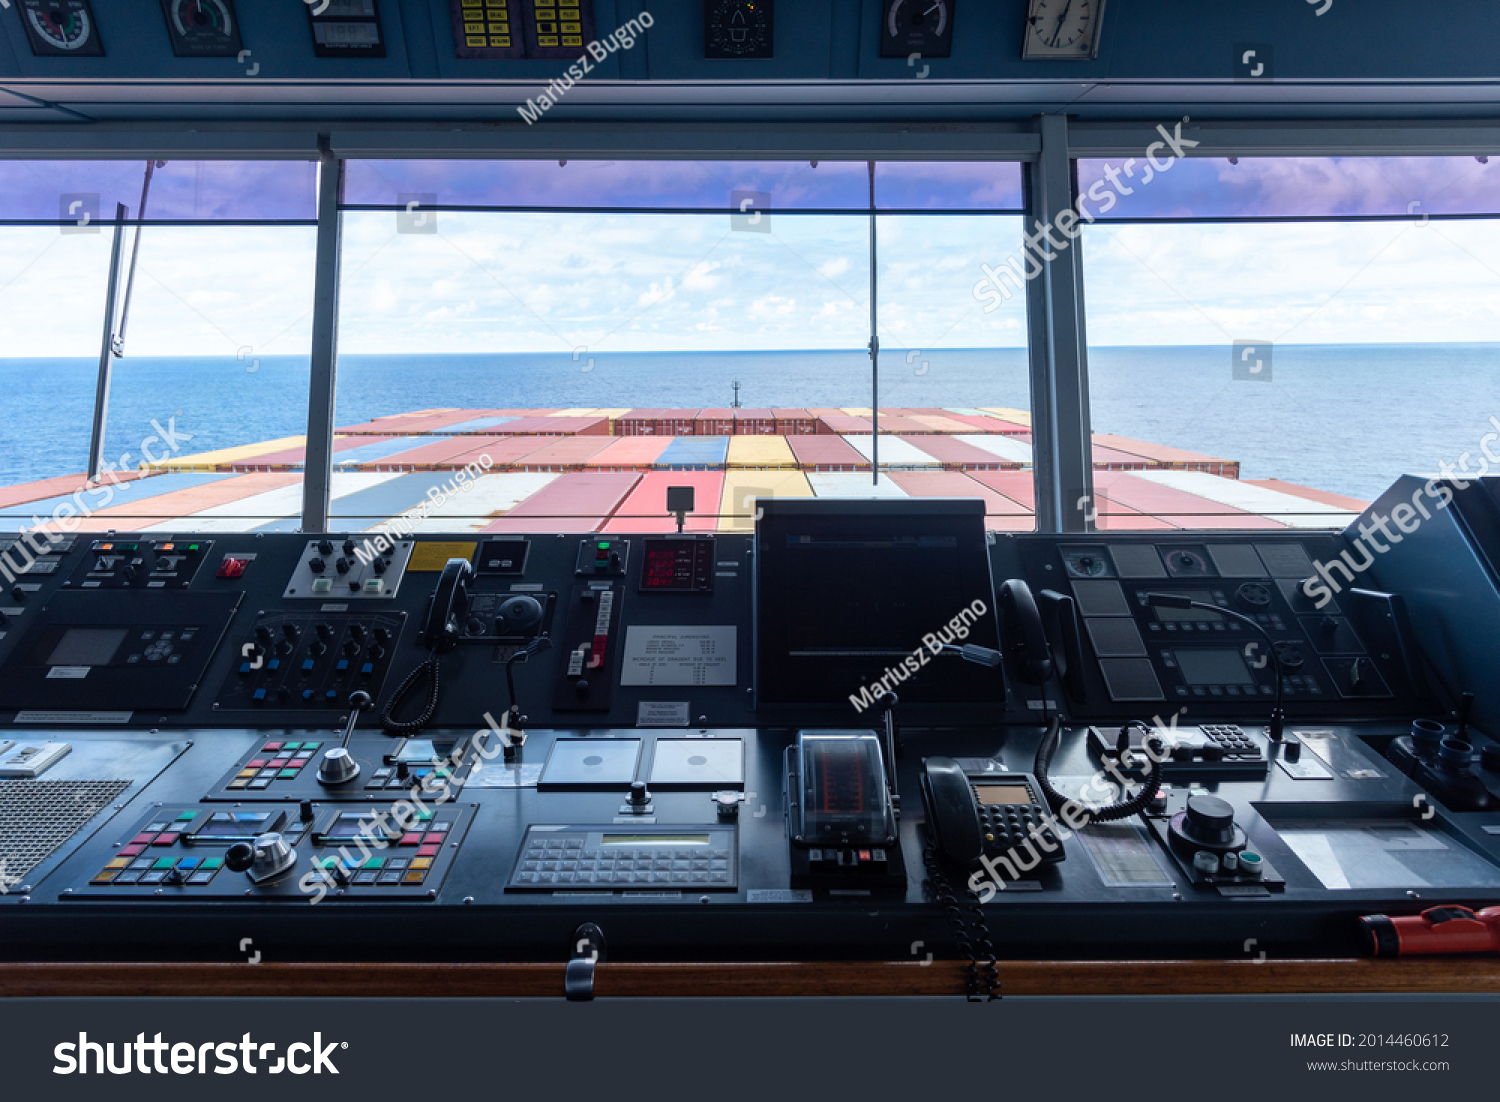 View of the control console on the navigational bridge of the cargo container ship.  #2014460612